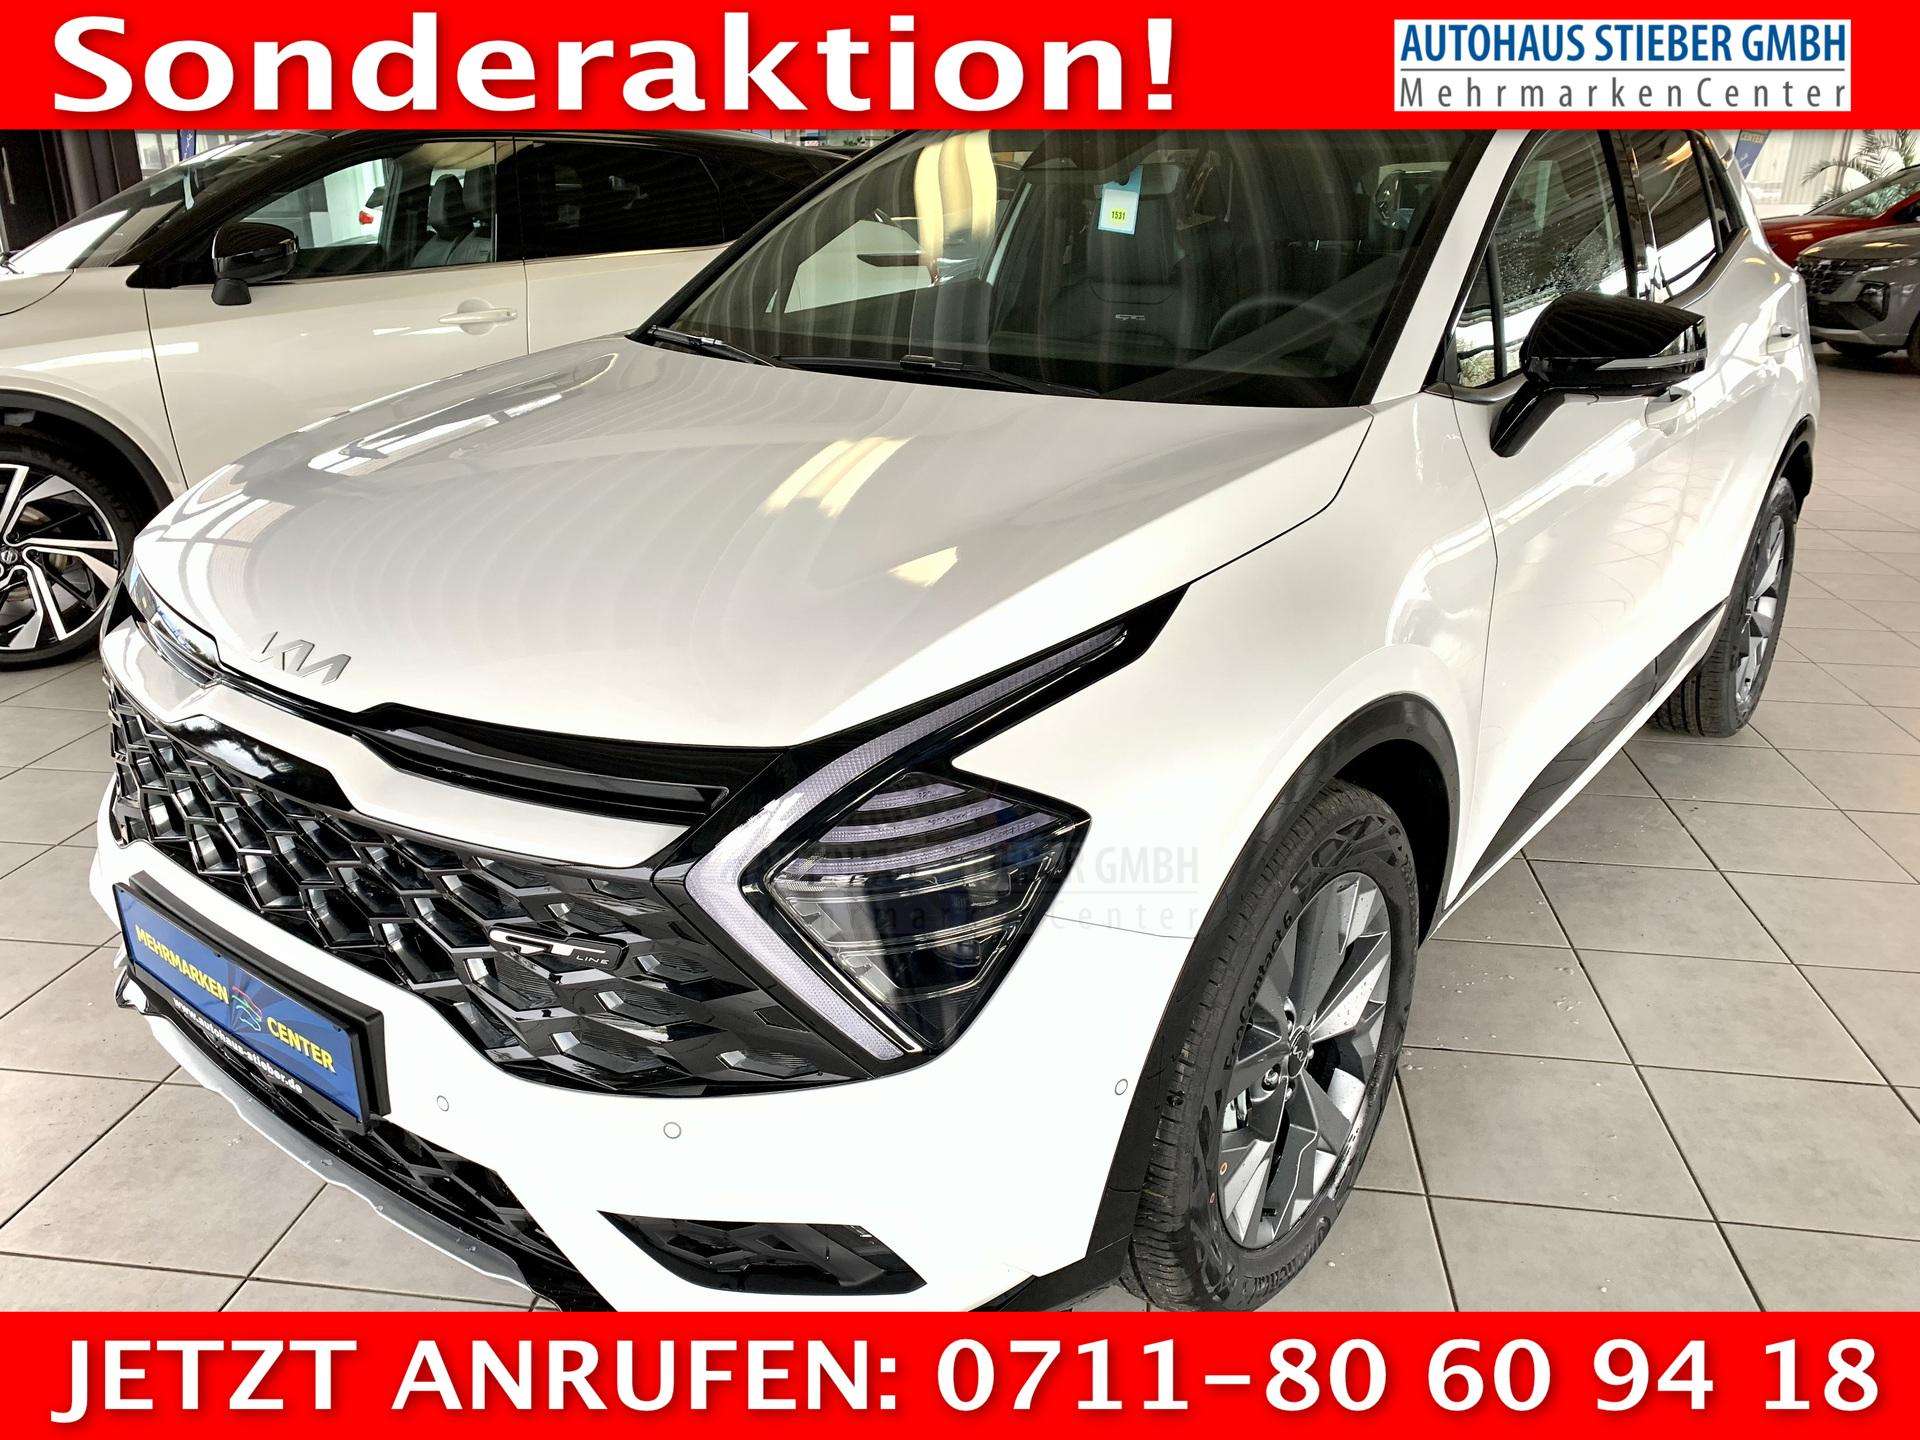 Kia Sportage Off-Road/Pick-up in White new in Stuttgart for € 40,990.-